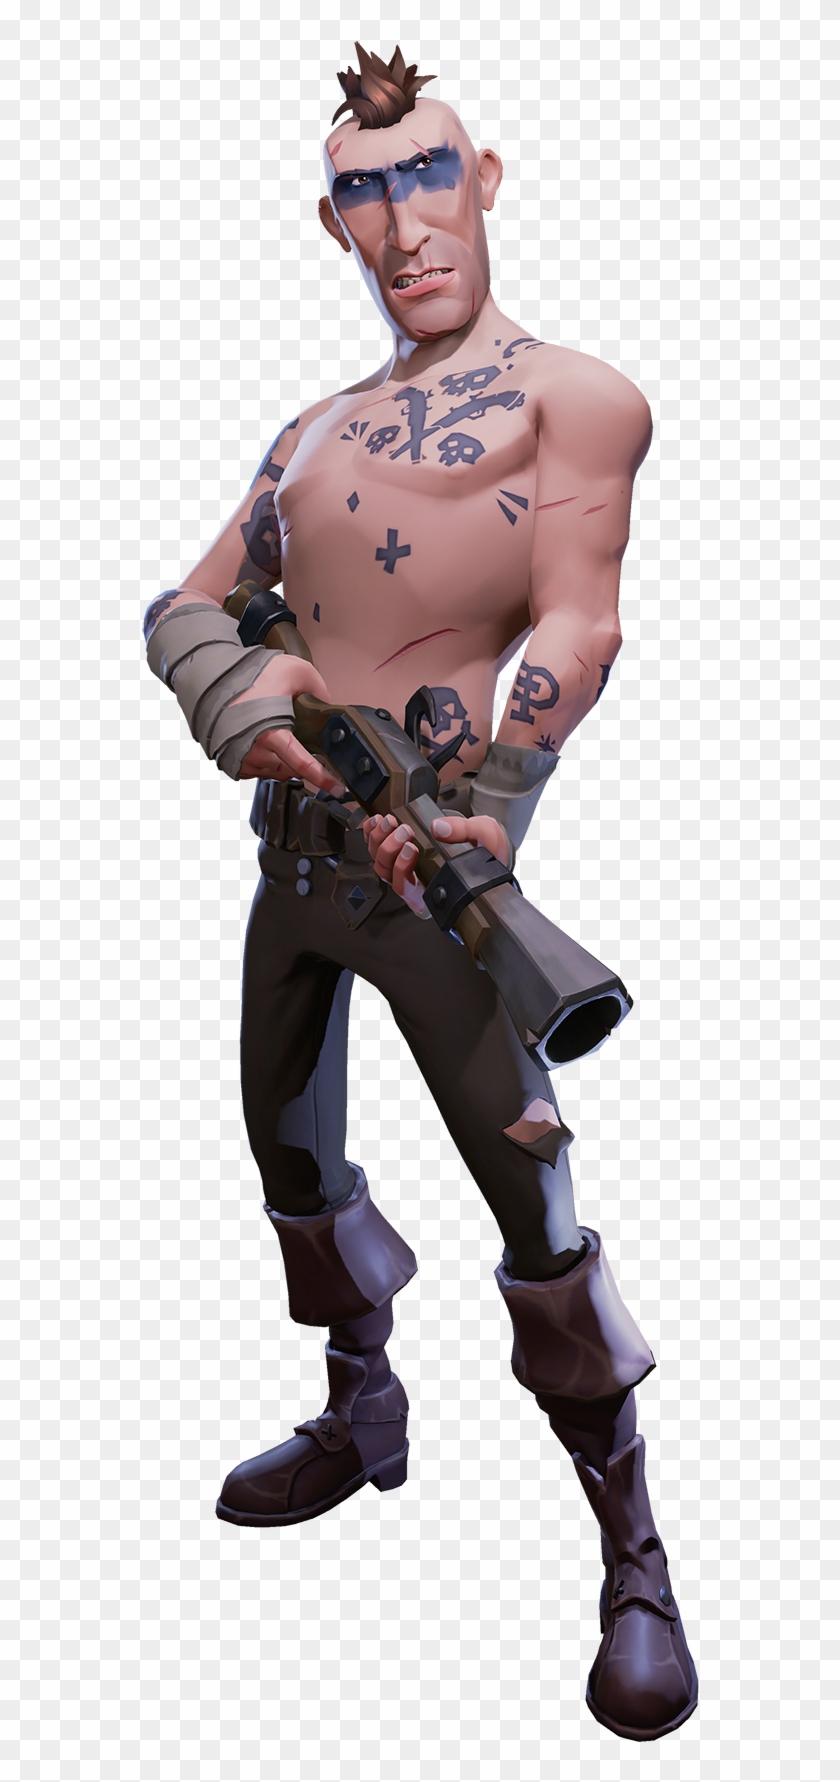 Sea Of Thieves Png High-quality Image - Barechested Clipart #3563156